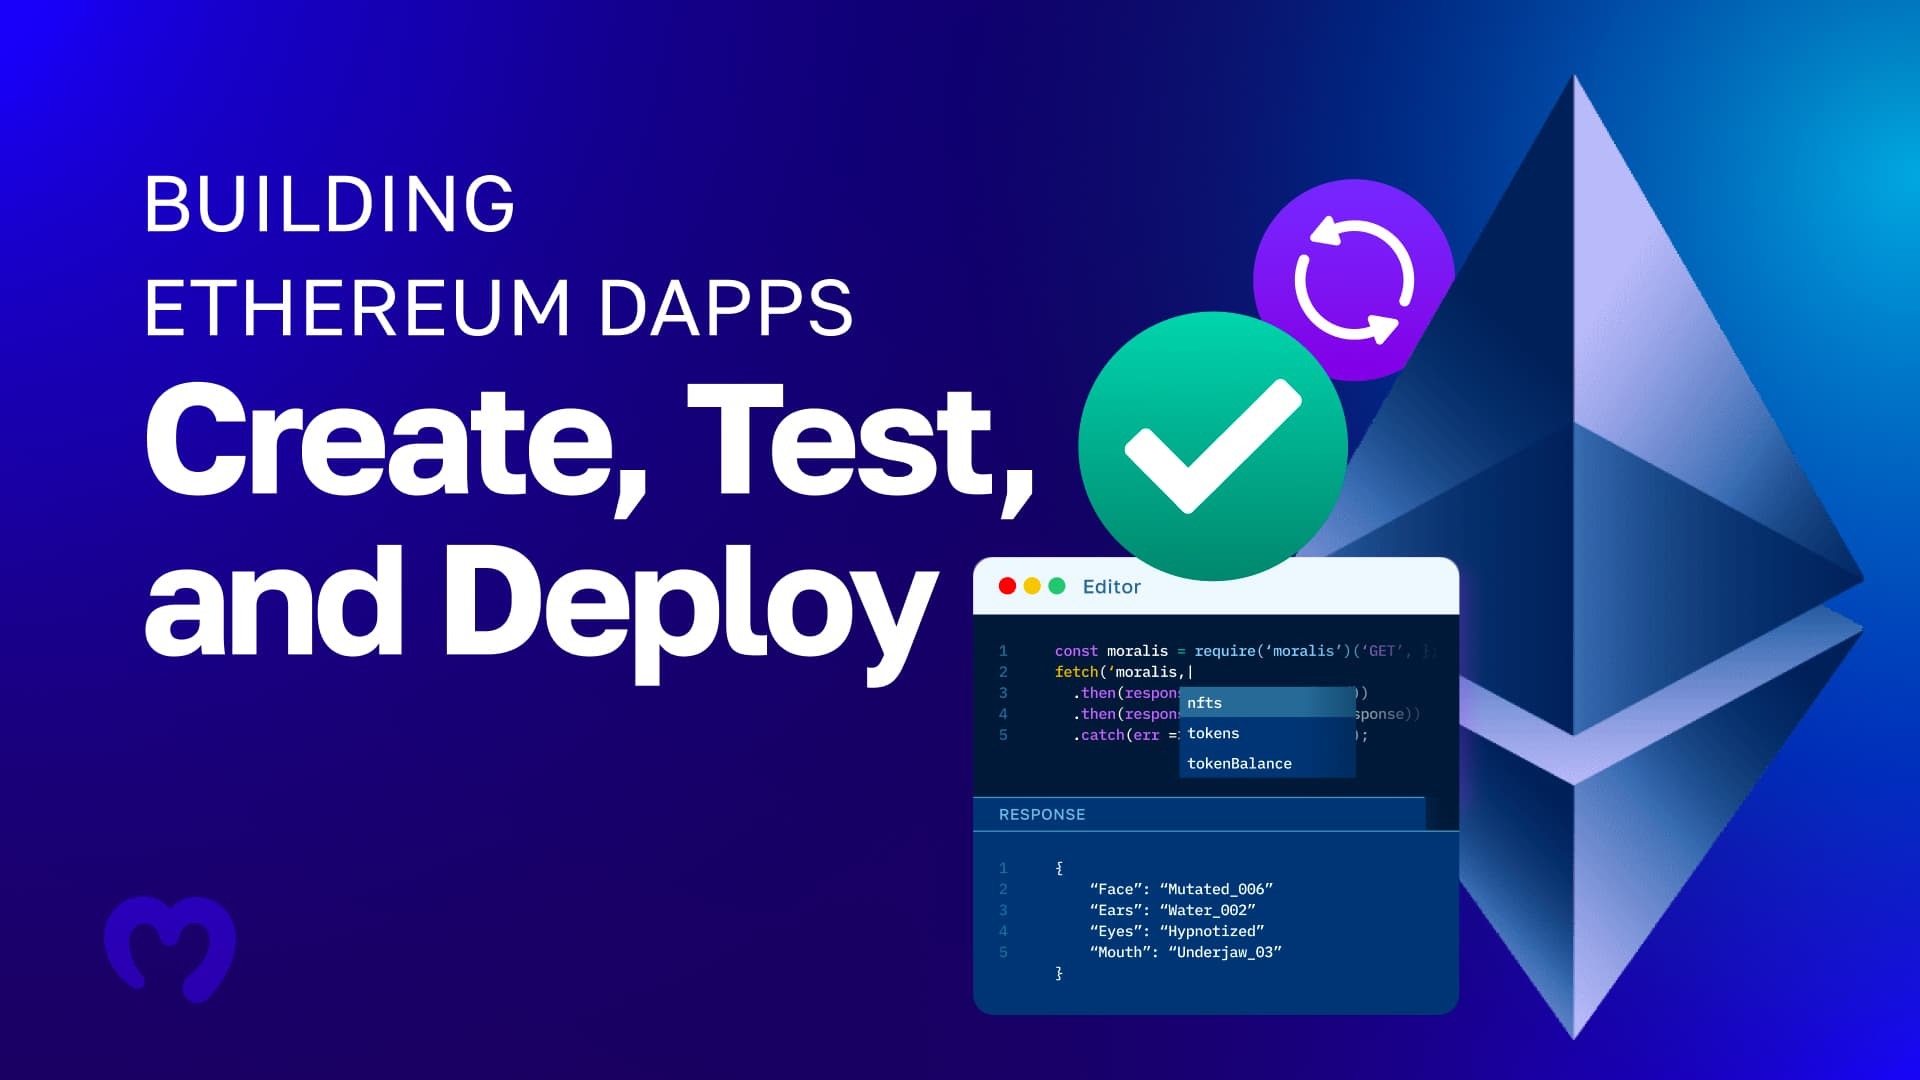 We see the Ethereum logo with code snippets in front and the title "Building Ethereum Dapps - Create, Test, and Deploy".